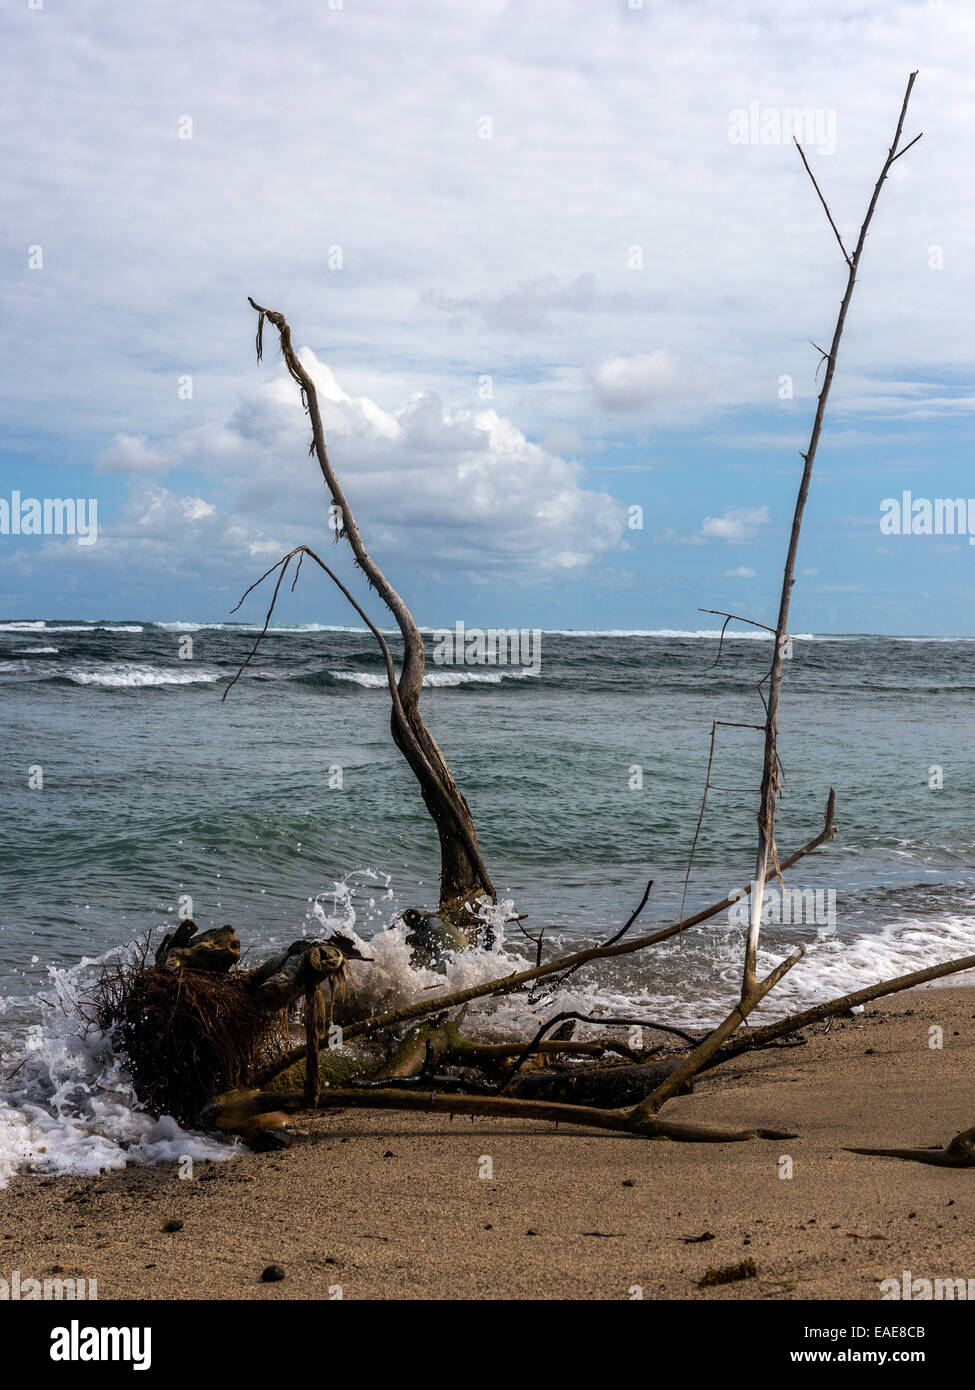 Caribbean Beach Seascape,depicting large driftwood with extended branches washed up on beach with waves breaking & sea view Stock Photo